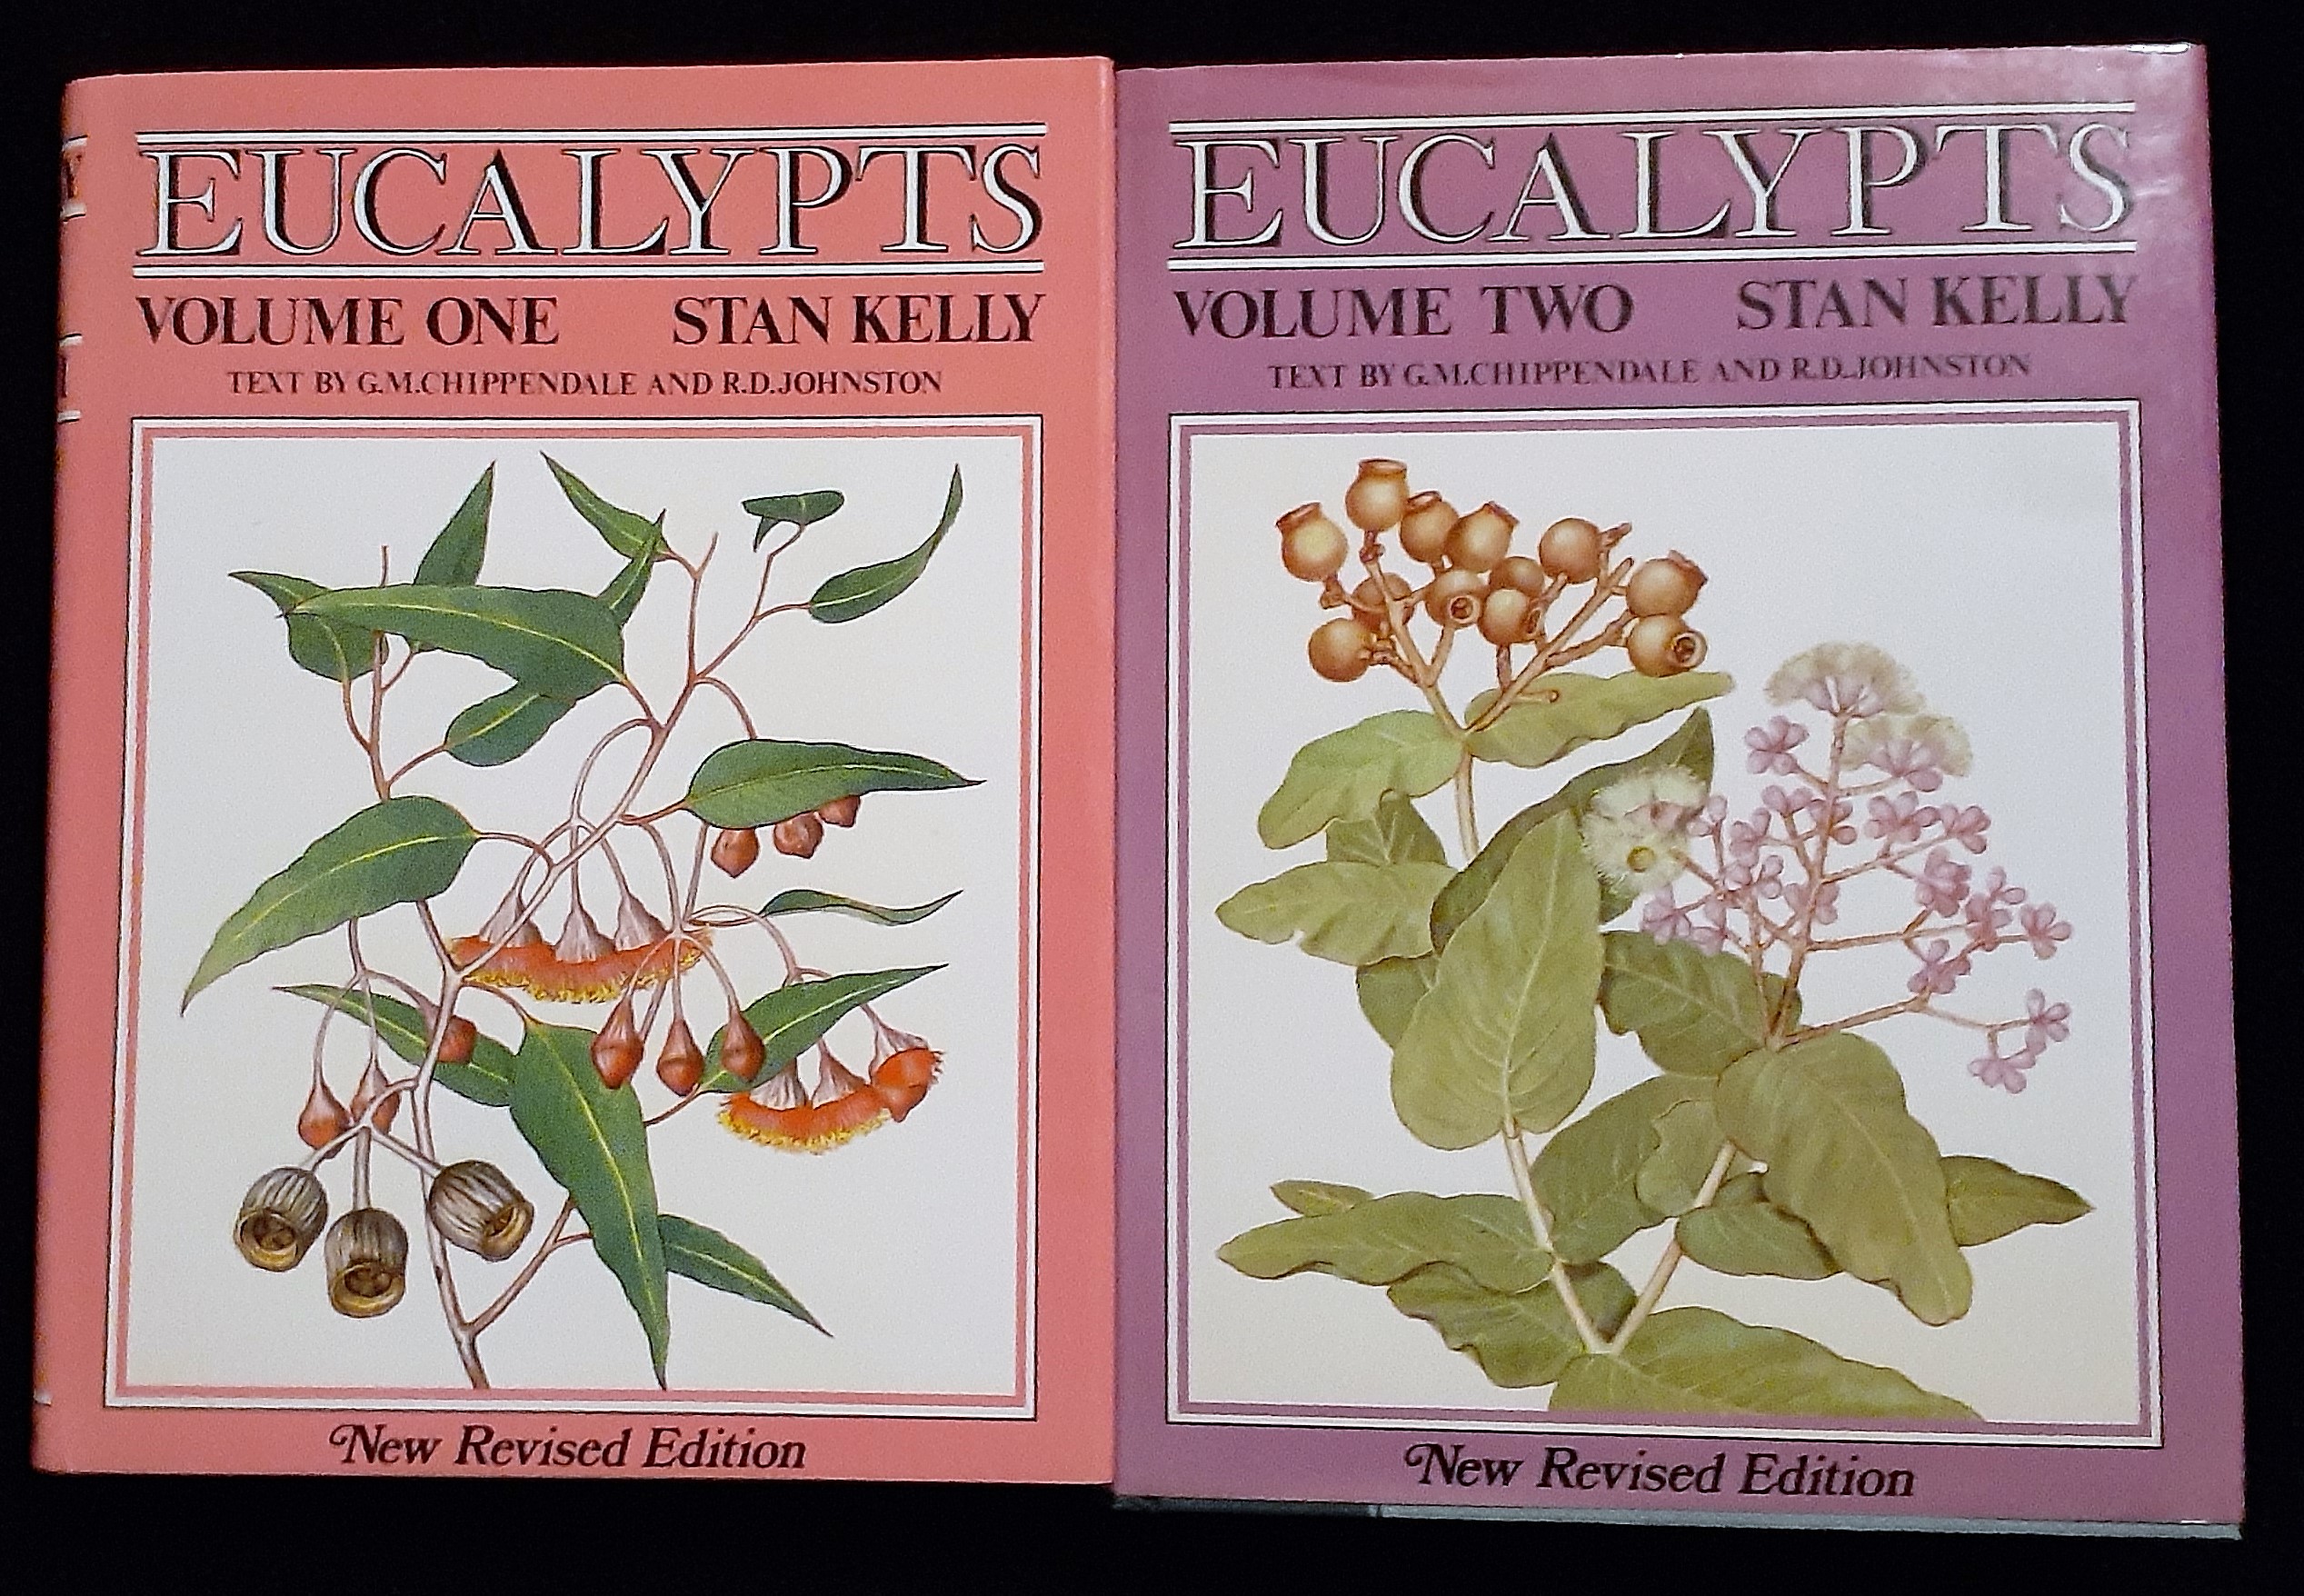 Eucalypts: Volume One and Volume Two: New Revised Edition - Stan Kelly; G. M. Chippendale; R. D. Johnston